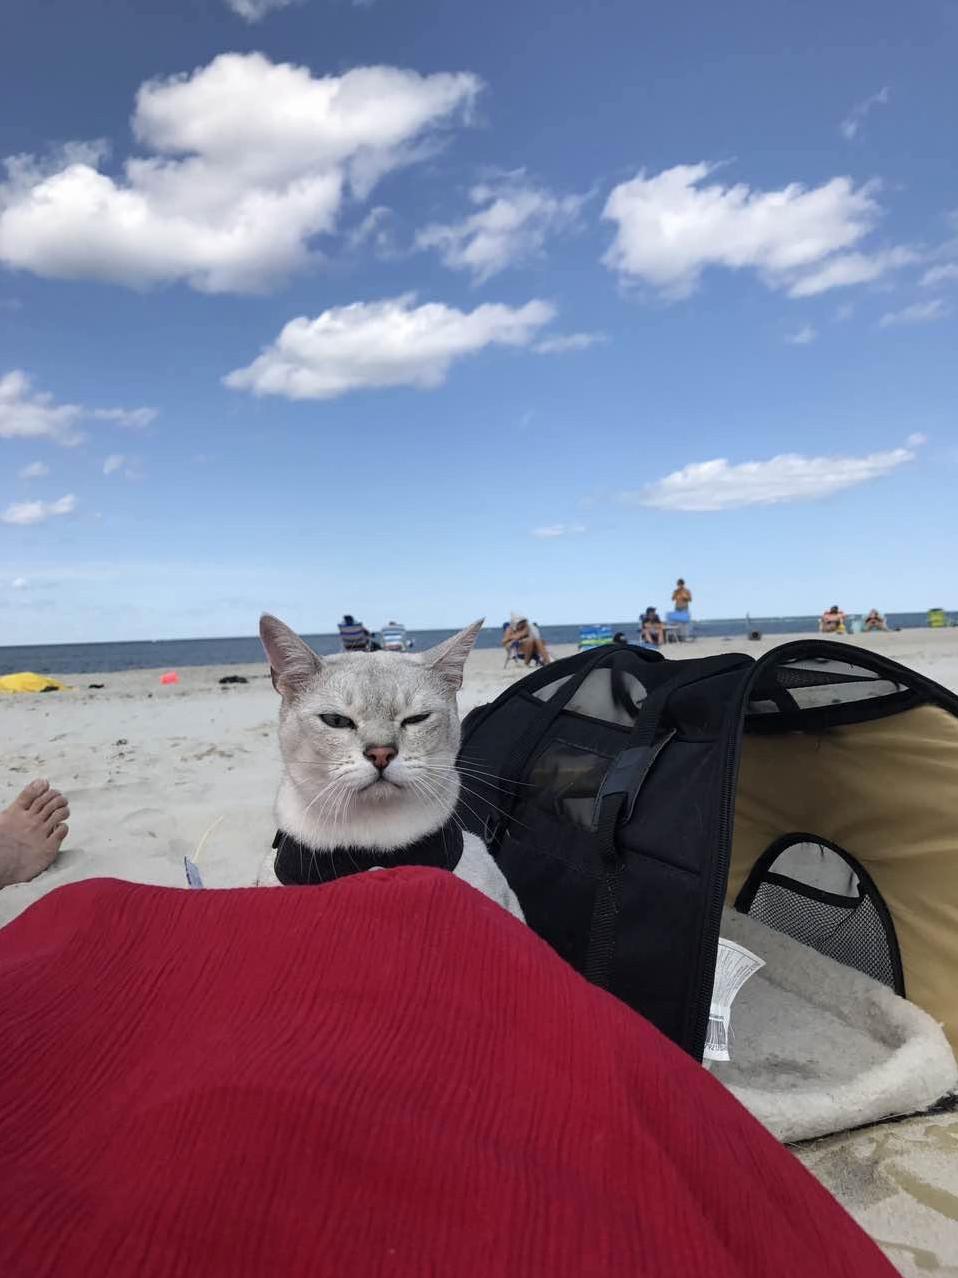 Relaxing at the beach